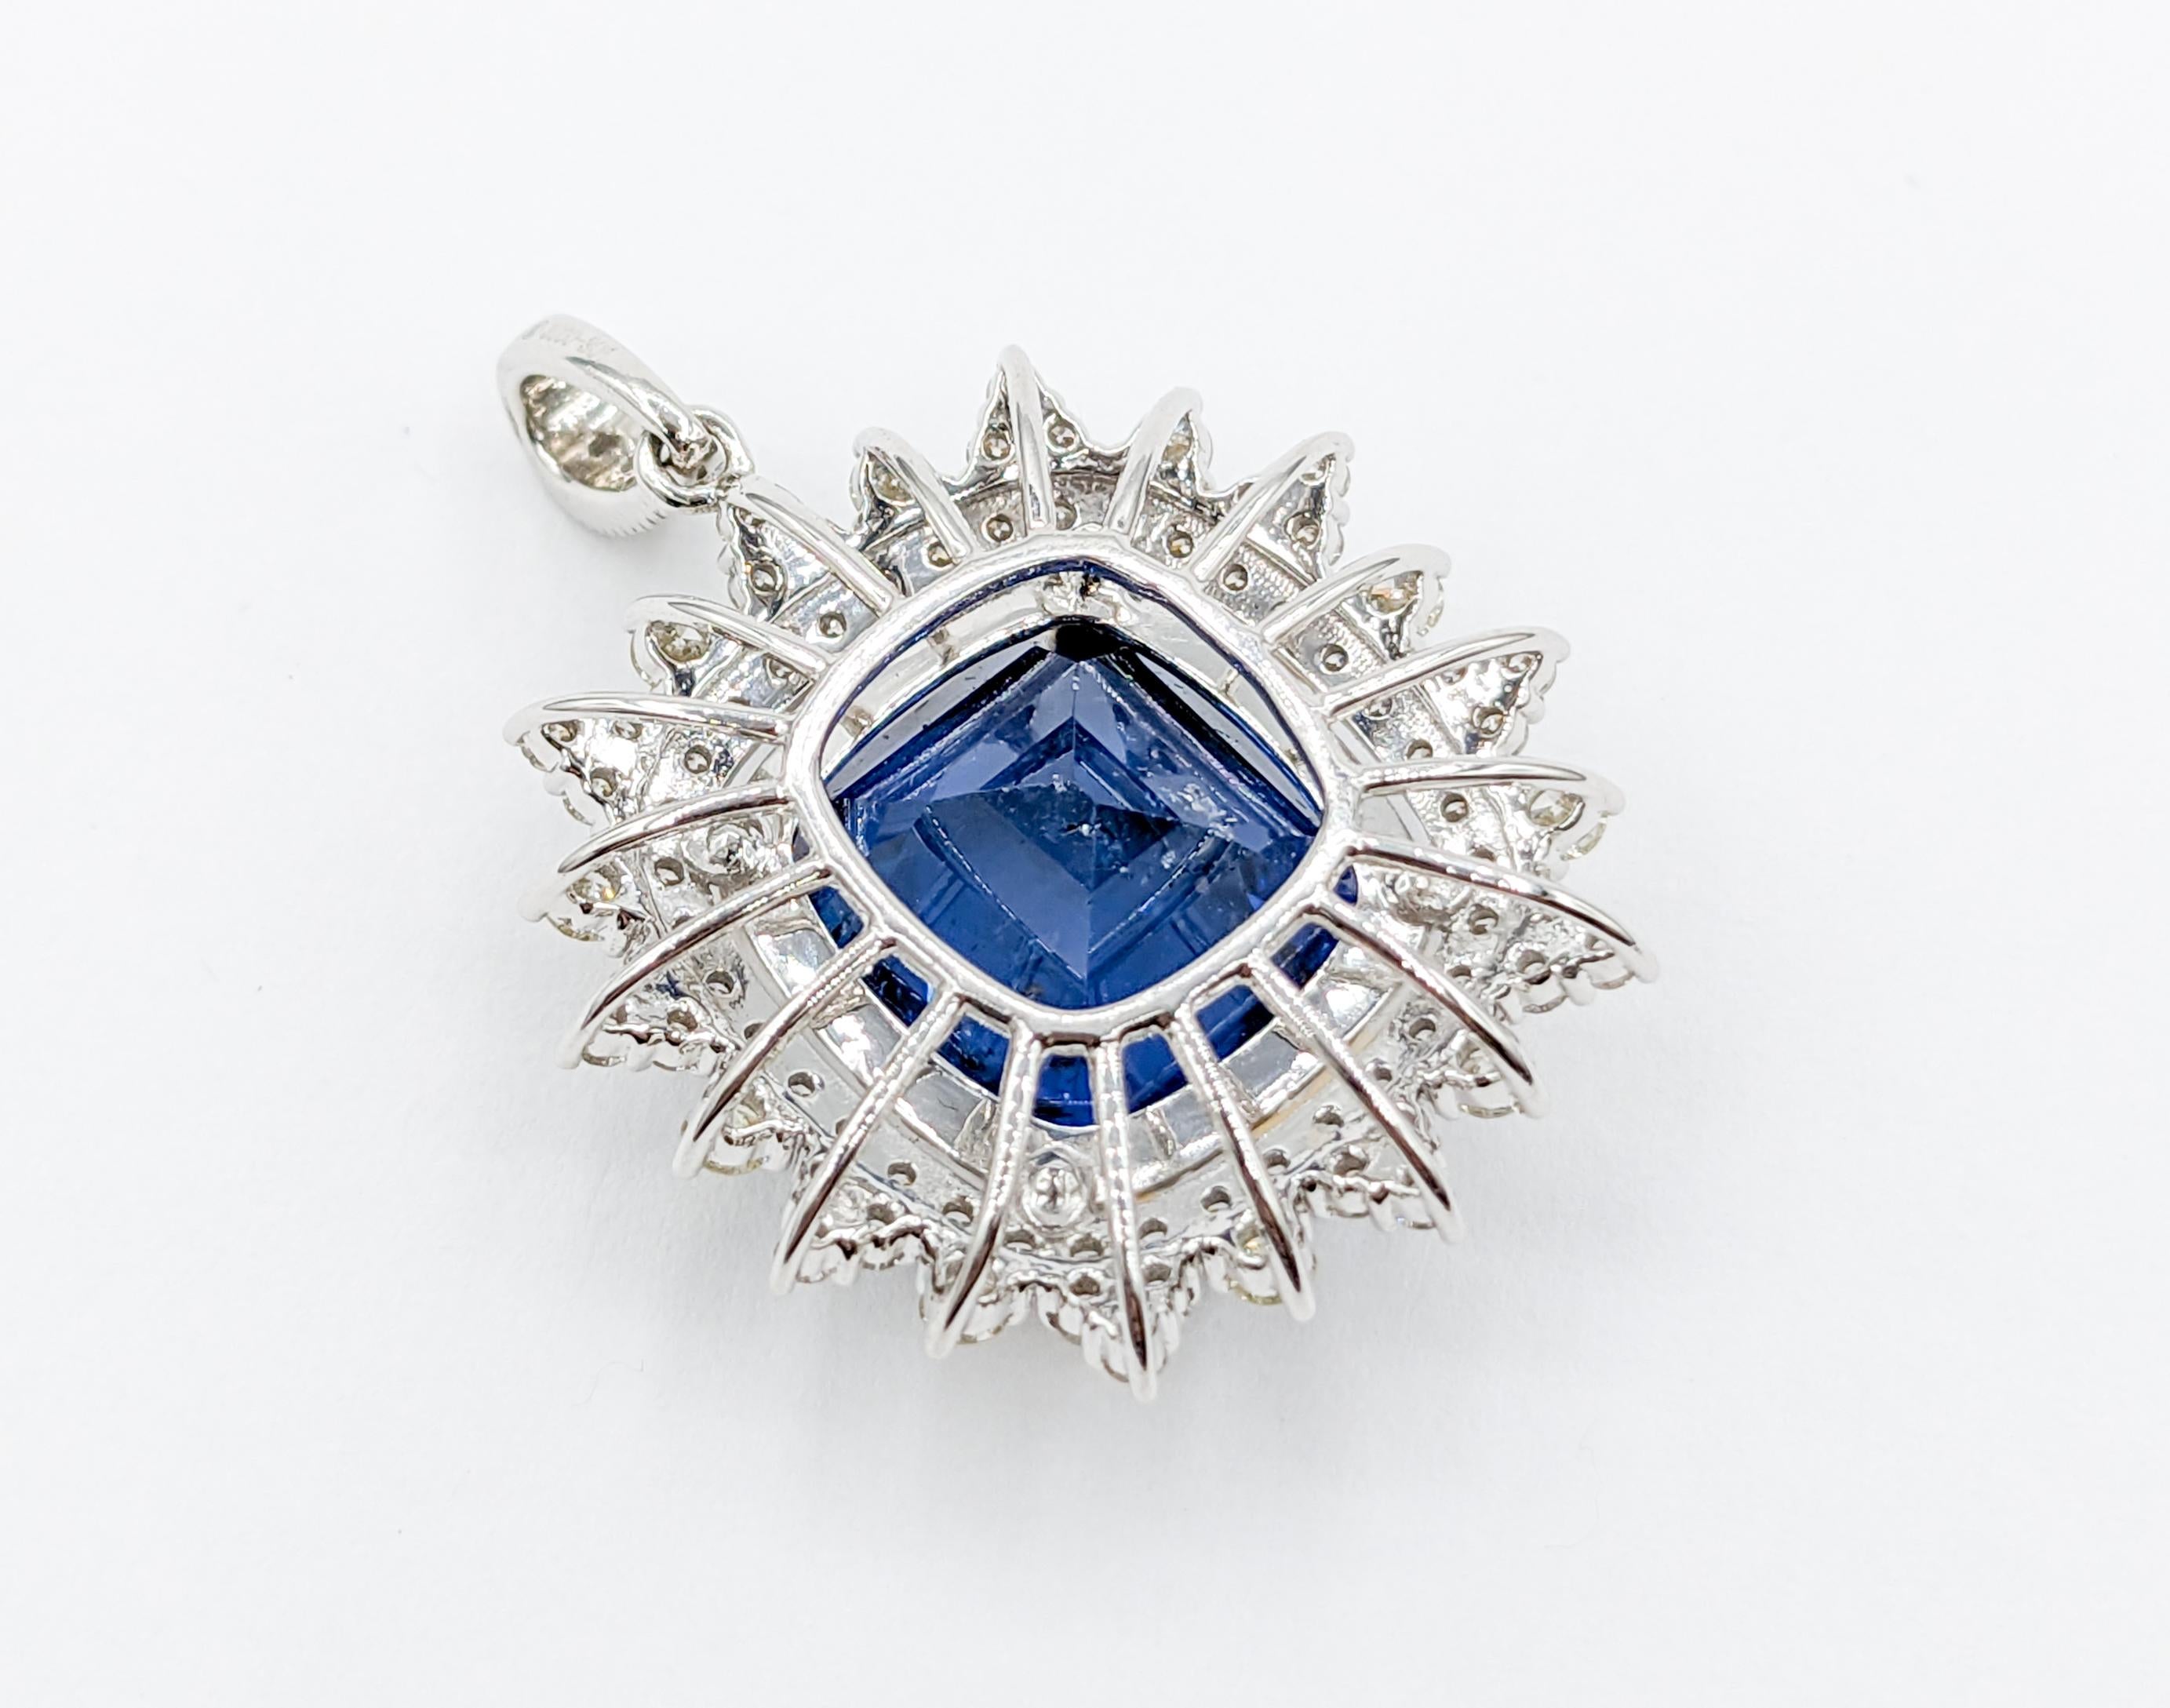 Cushion Cut Stunning 14.2ct Sapphire Pendant with Diamond Halo in 14kt White Gold For Sale